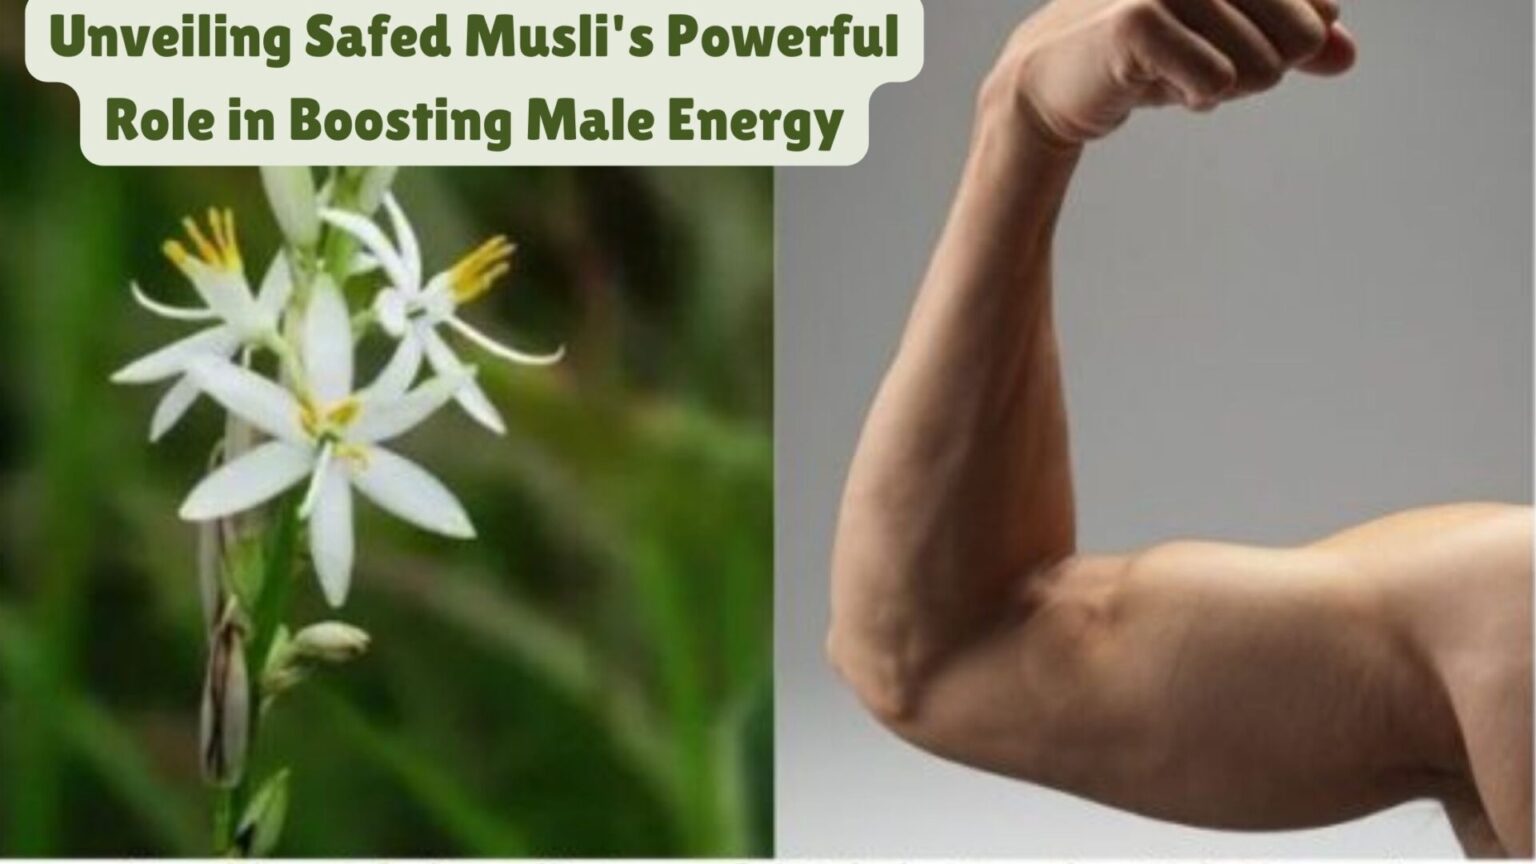 Unveiling Safed Musli's Powerful Role in Boosting Male Energy